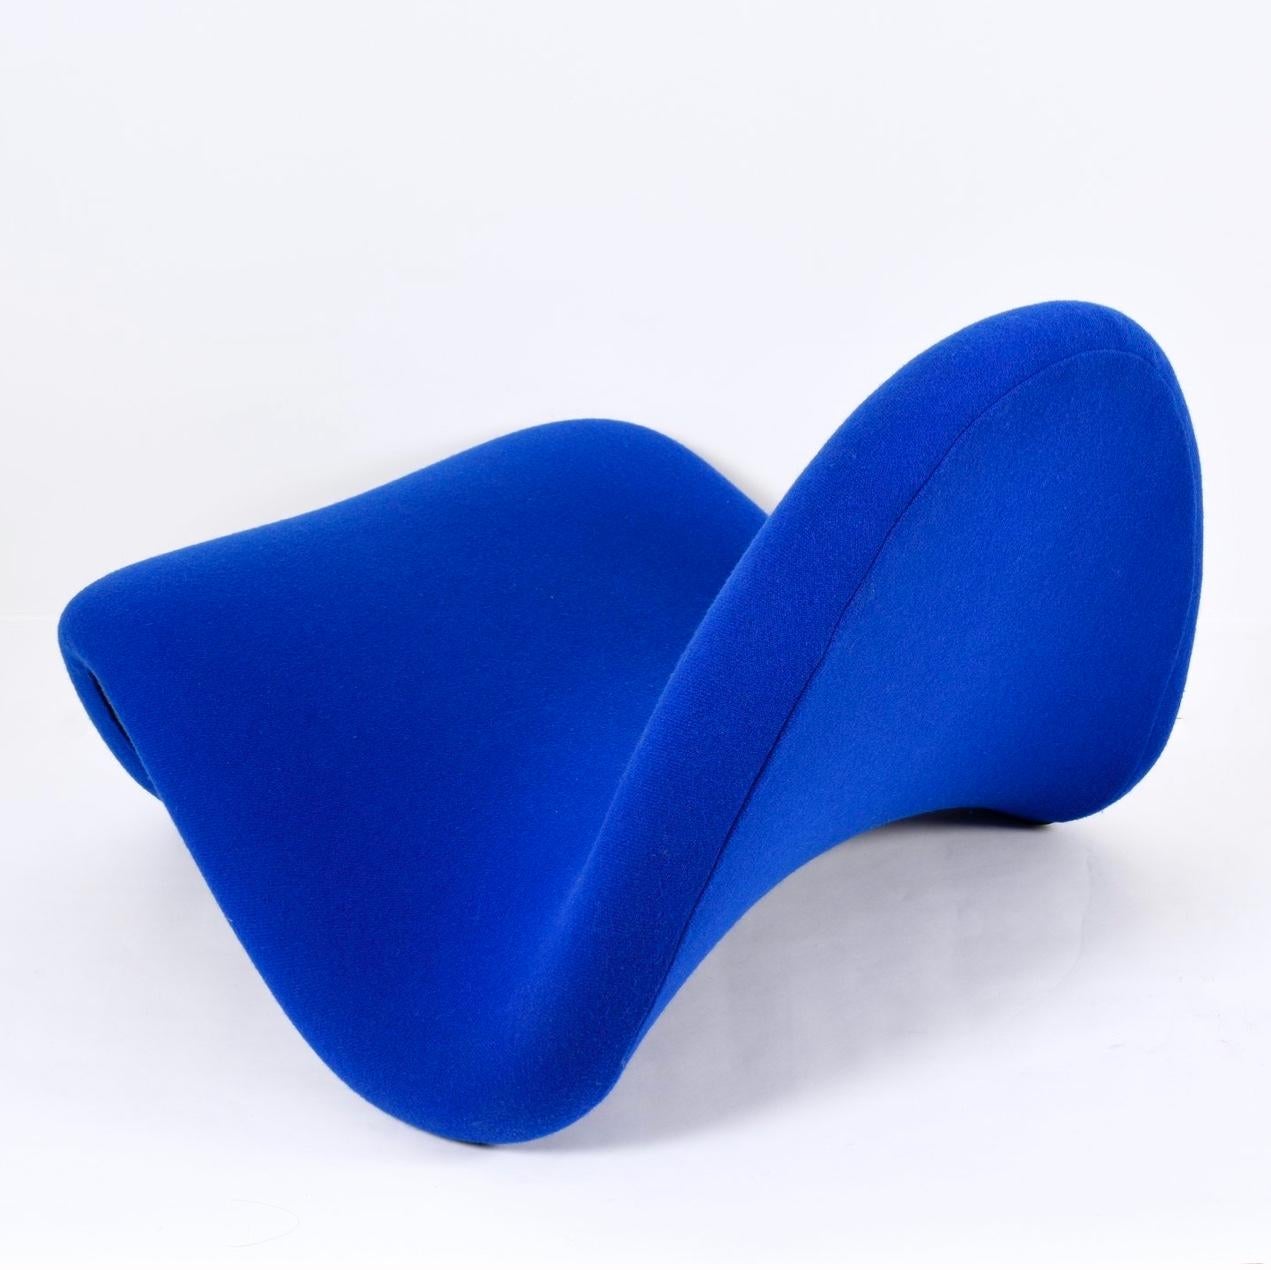 Space Age Pierre Paulin (1927-2009), 557 or Tongue chair, Artifort ed., 1967 For Sale